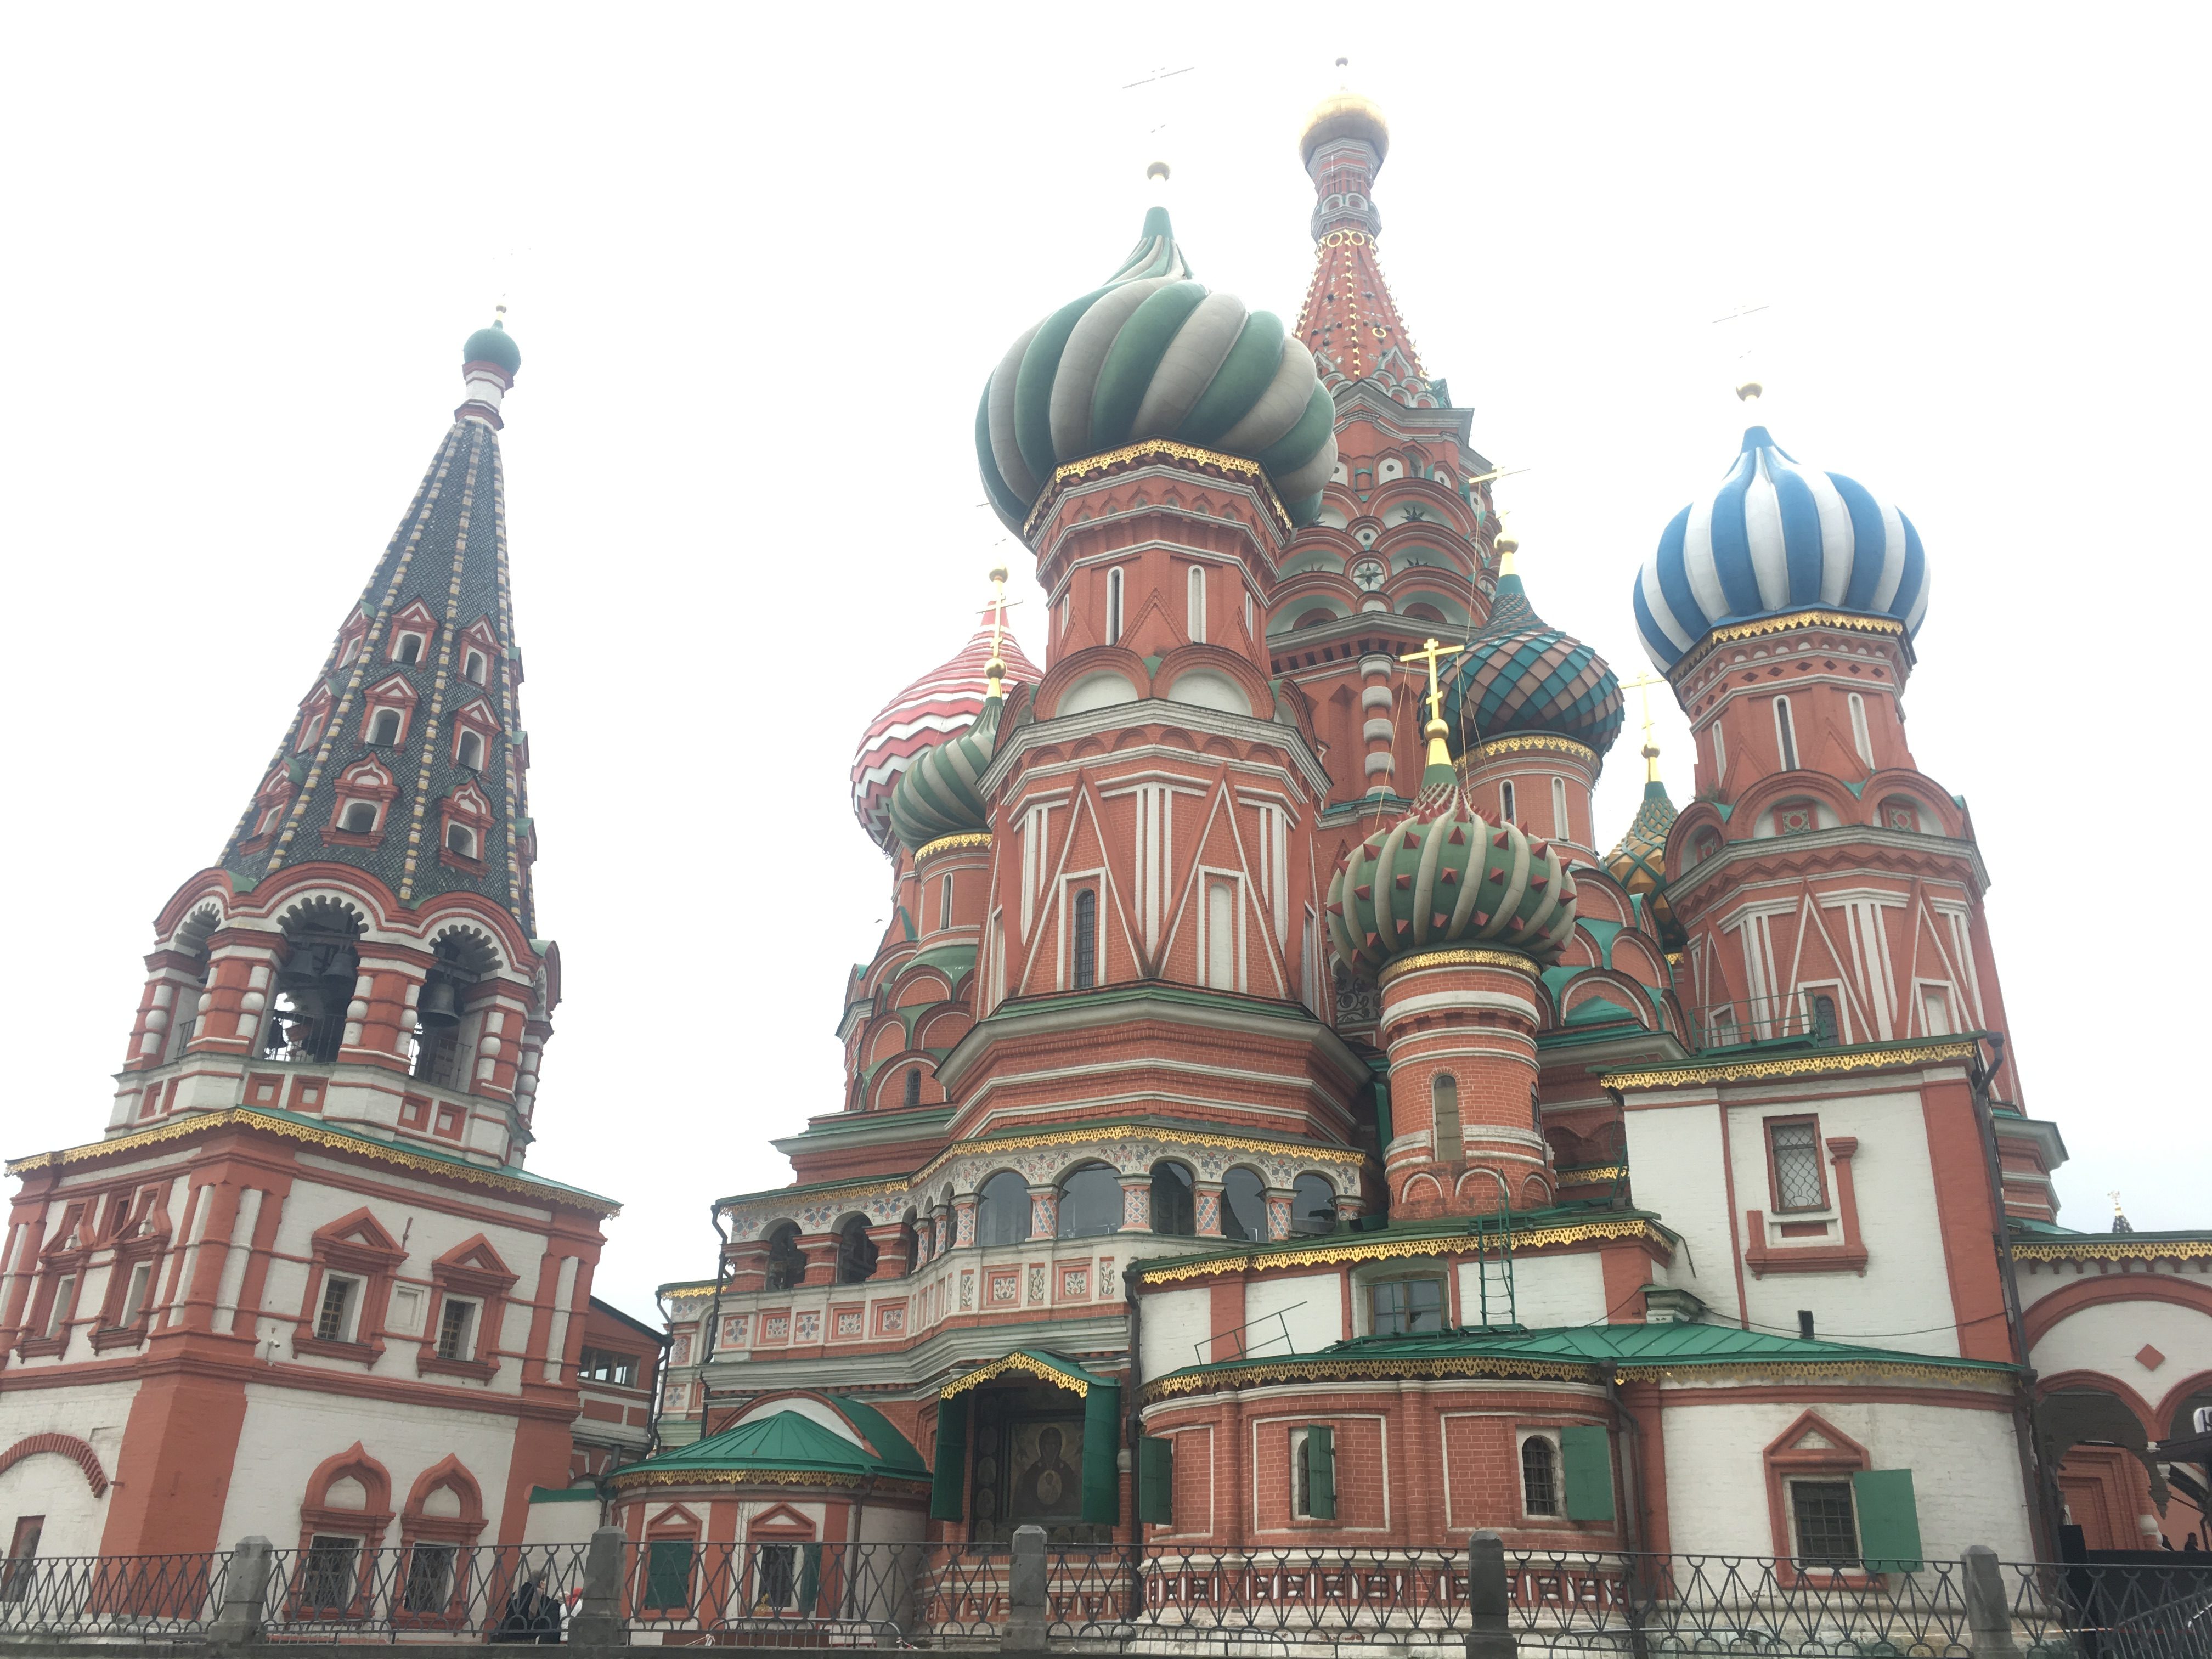 St Basil's Cathedral is nine churches in one